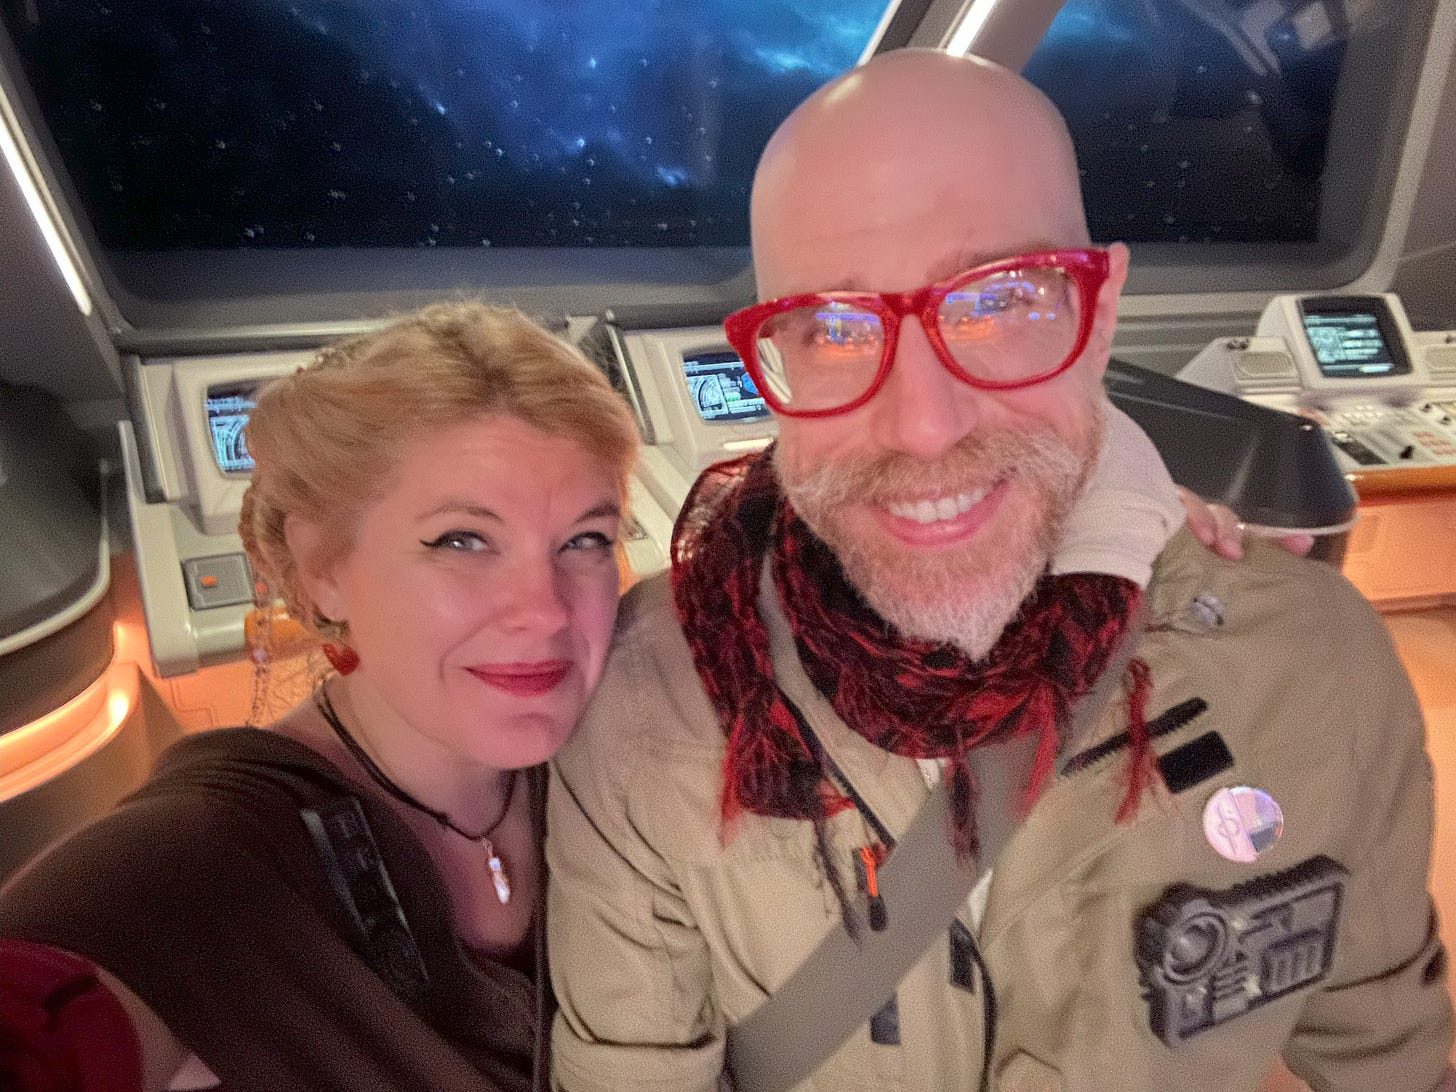 Blonde woman and bald man with red glasses, both dressed in shades of red and brown, standing in front of a bunch of starship consoles with a starfield visible through the windows